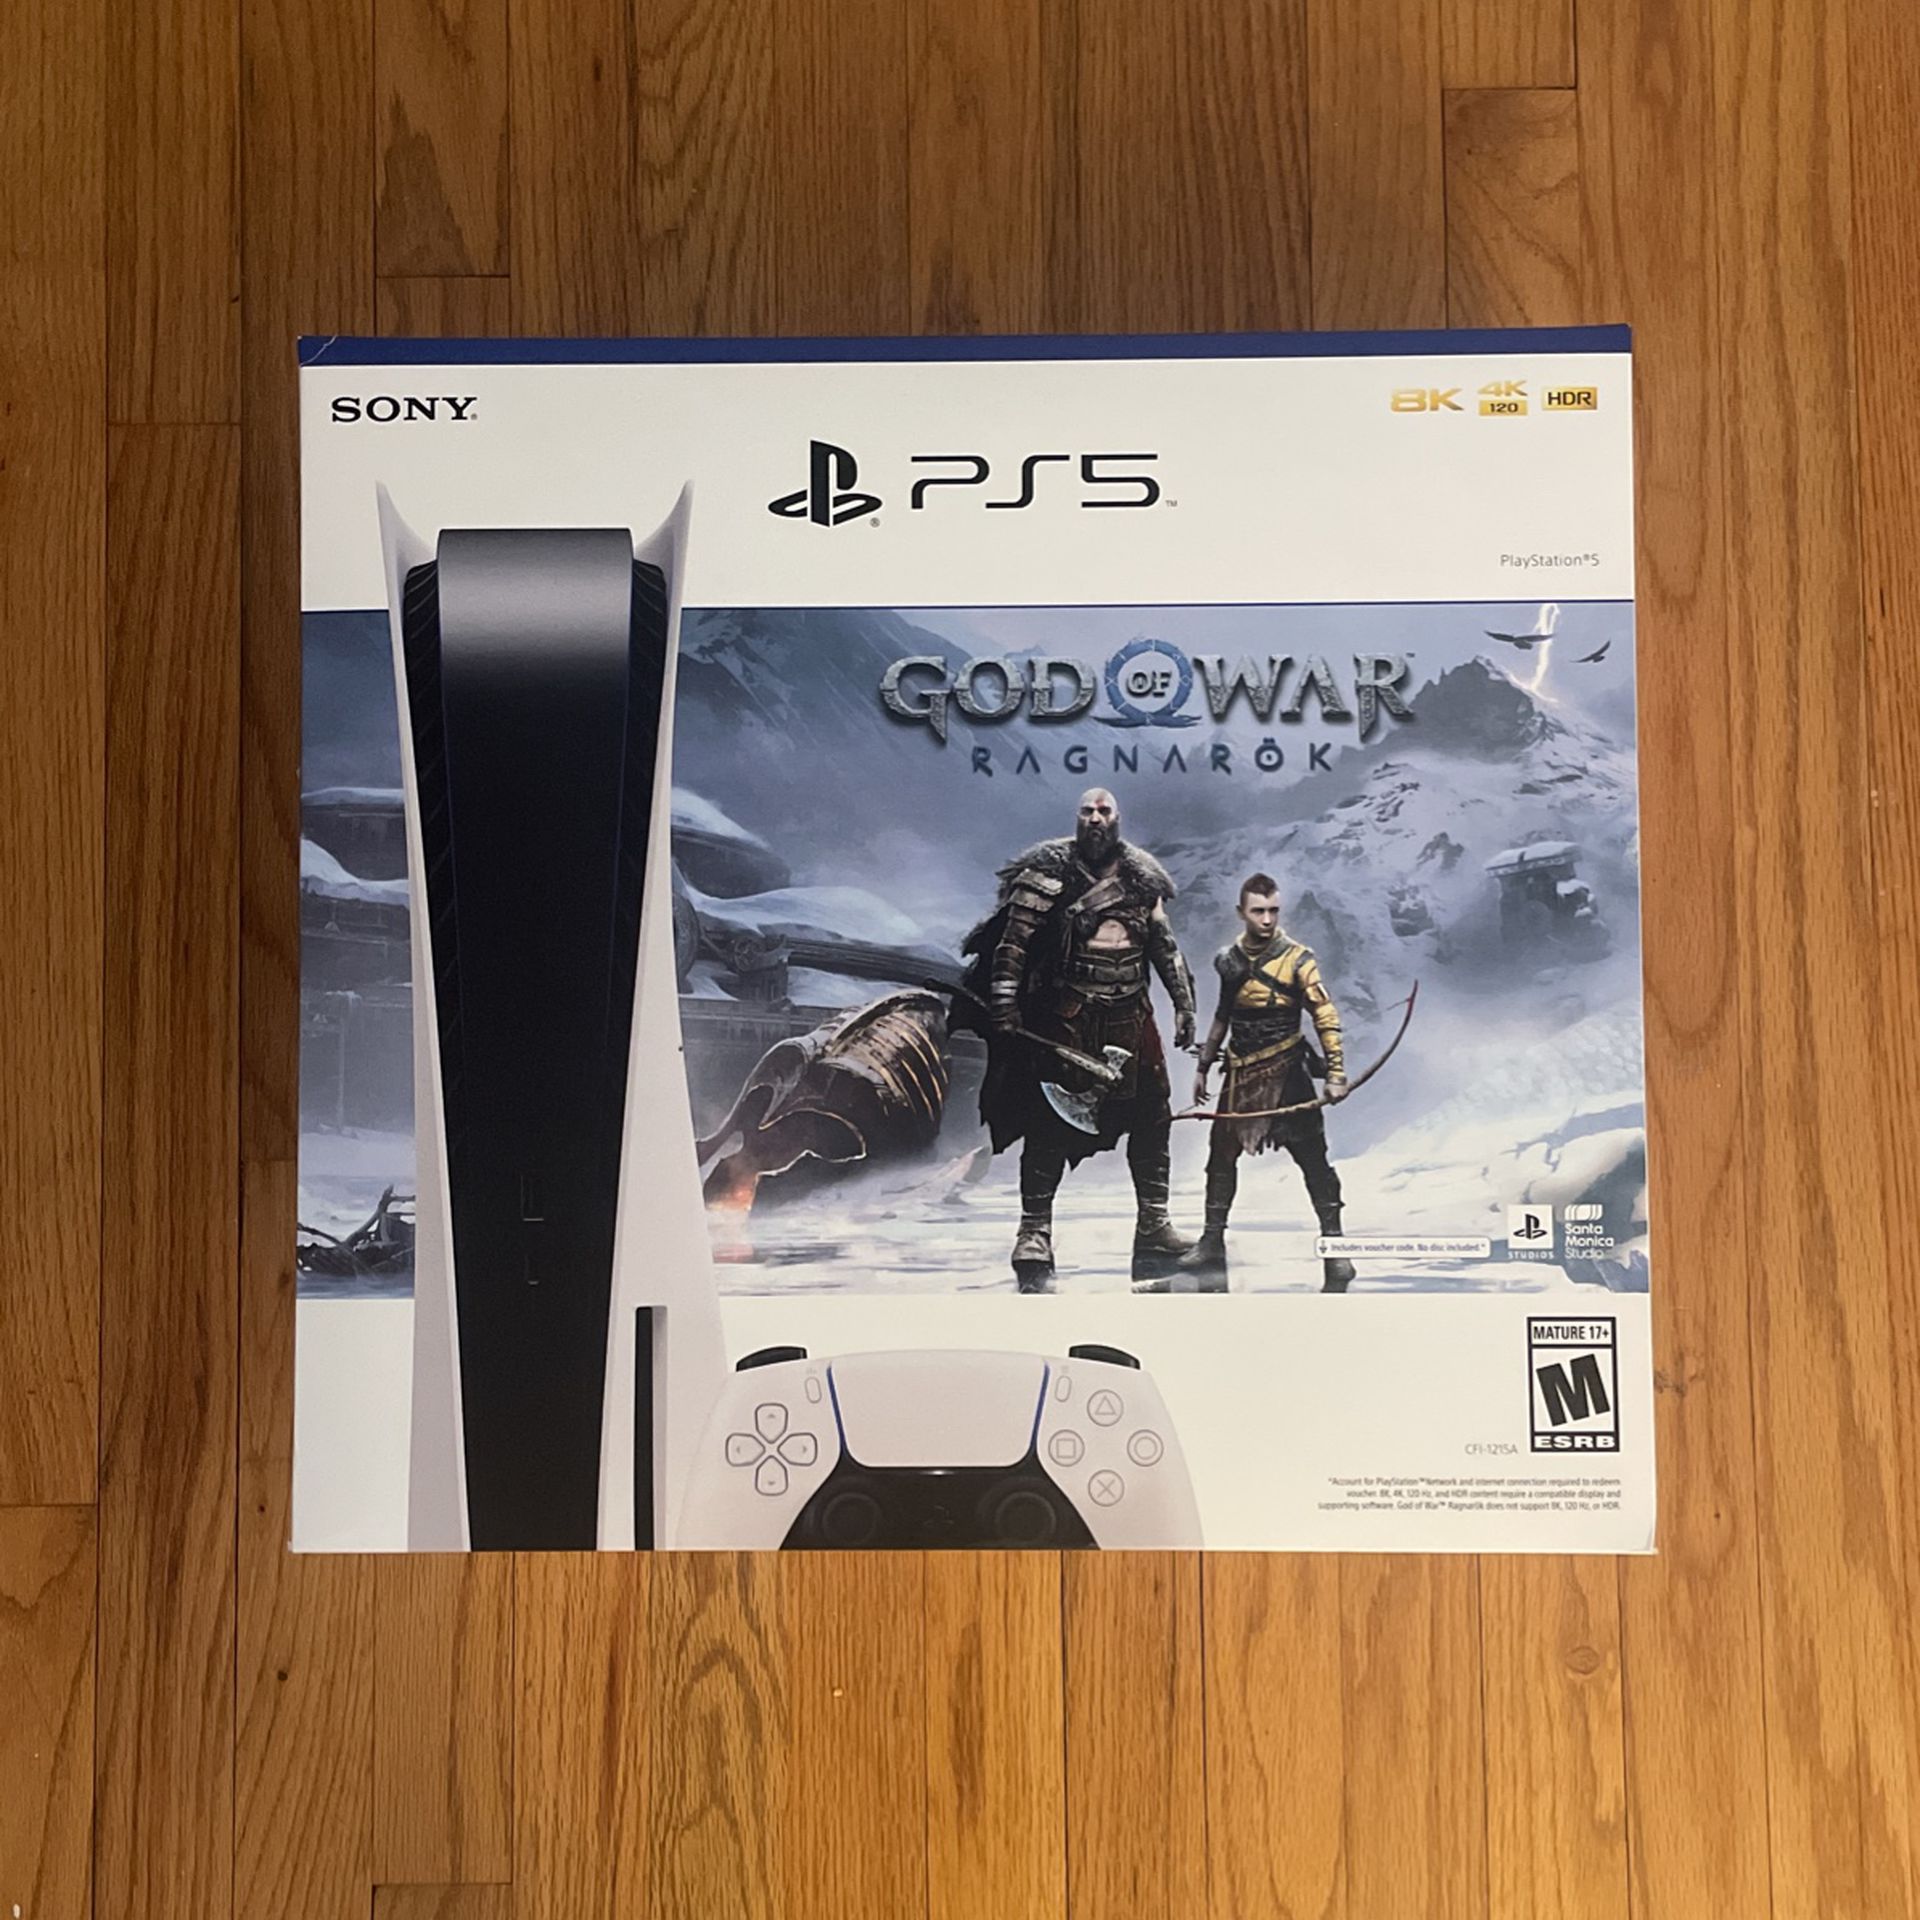 CoD Call of Duty VANGUARD - PS4 PlayStation 4 Factory Sealed - PS5 Upgrade  US for Sale in Beaverton, OR - OfferUp